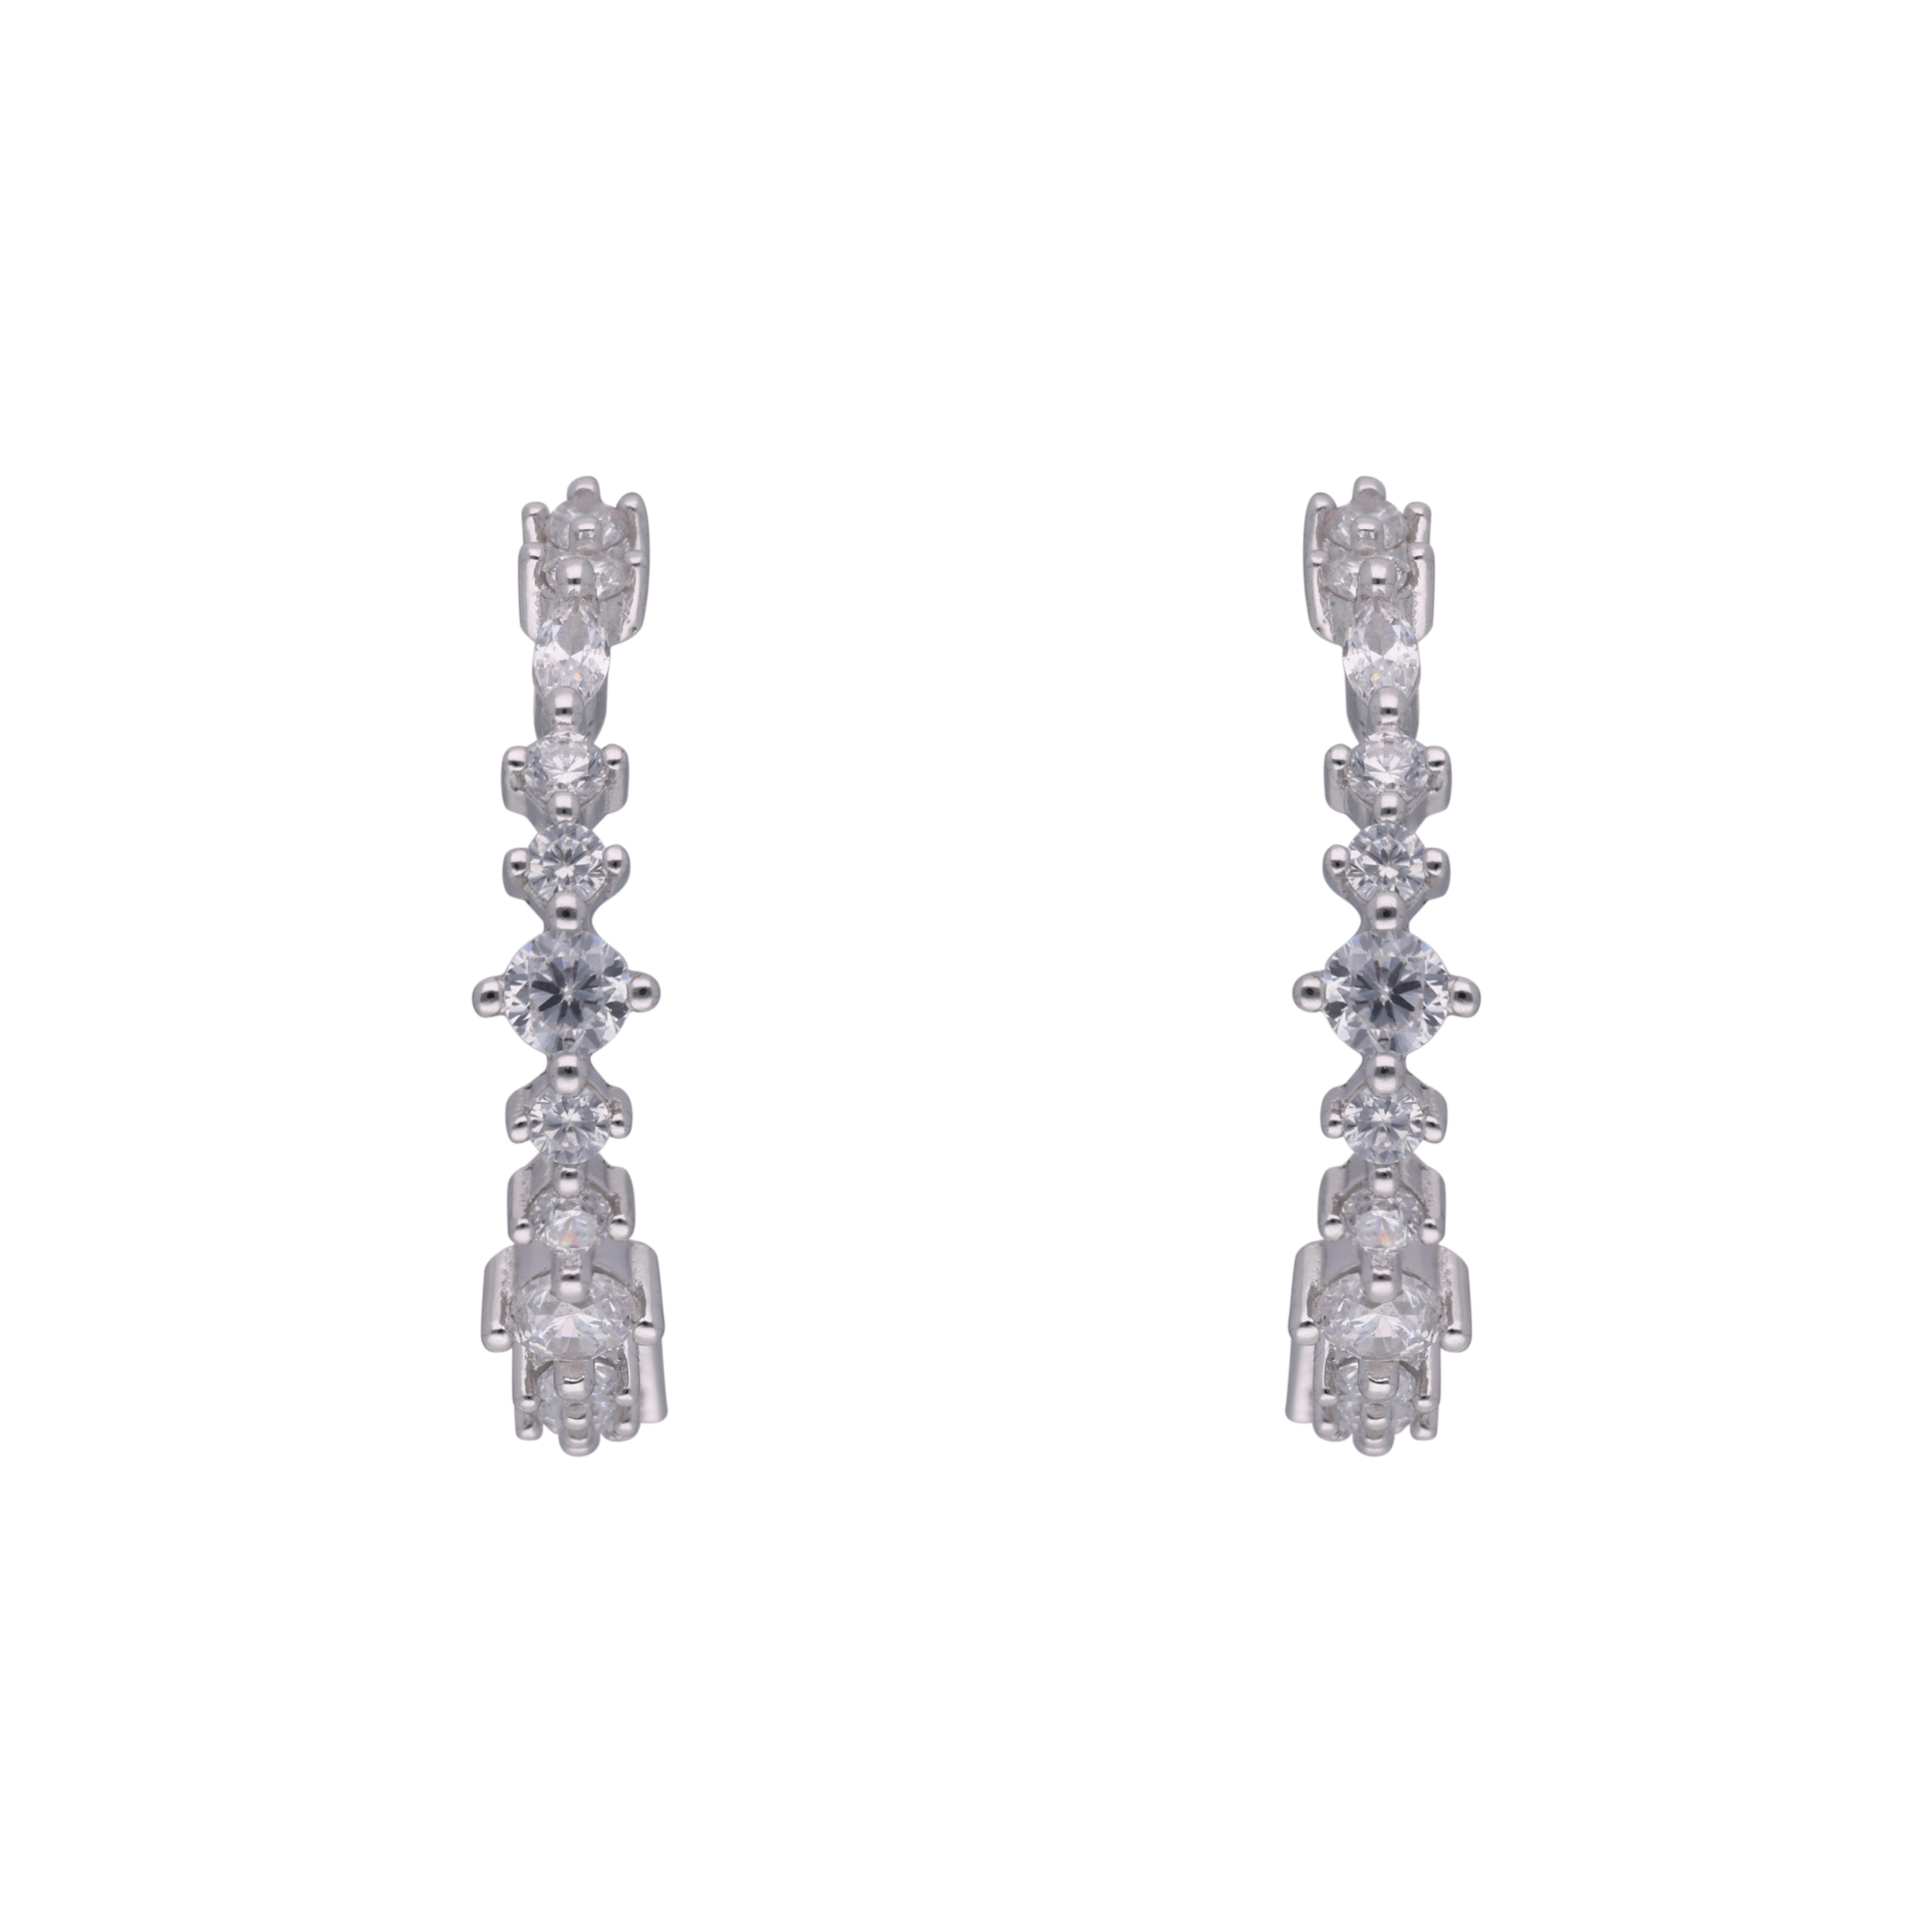 Radiant Sparkle: Sterling Silver Ear Hoops with Cubic Zirconia Accents | SKU : 0003114162